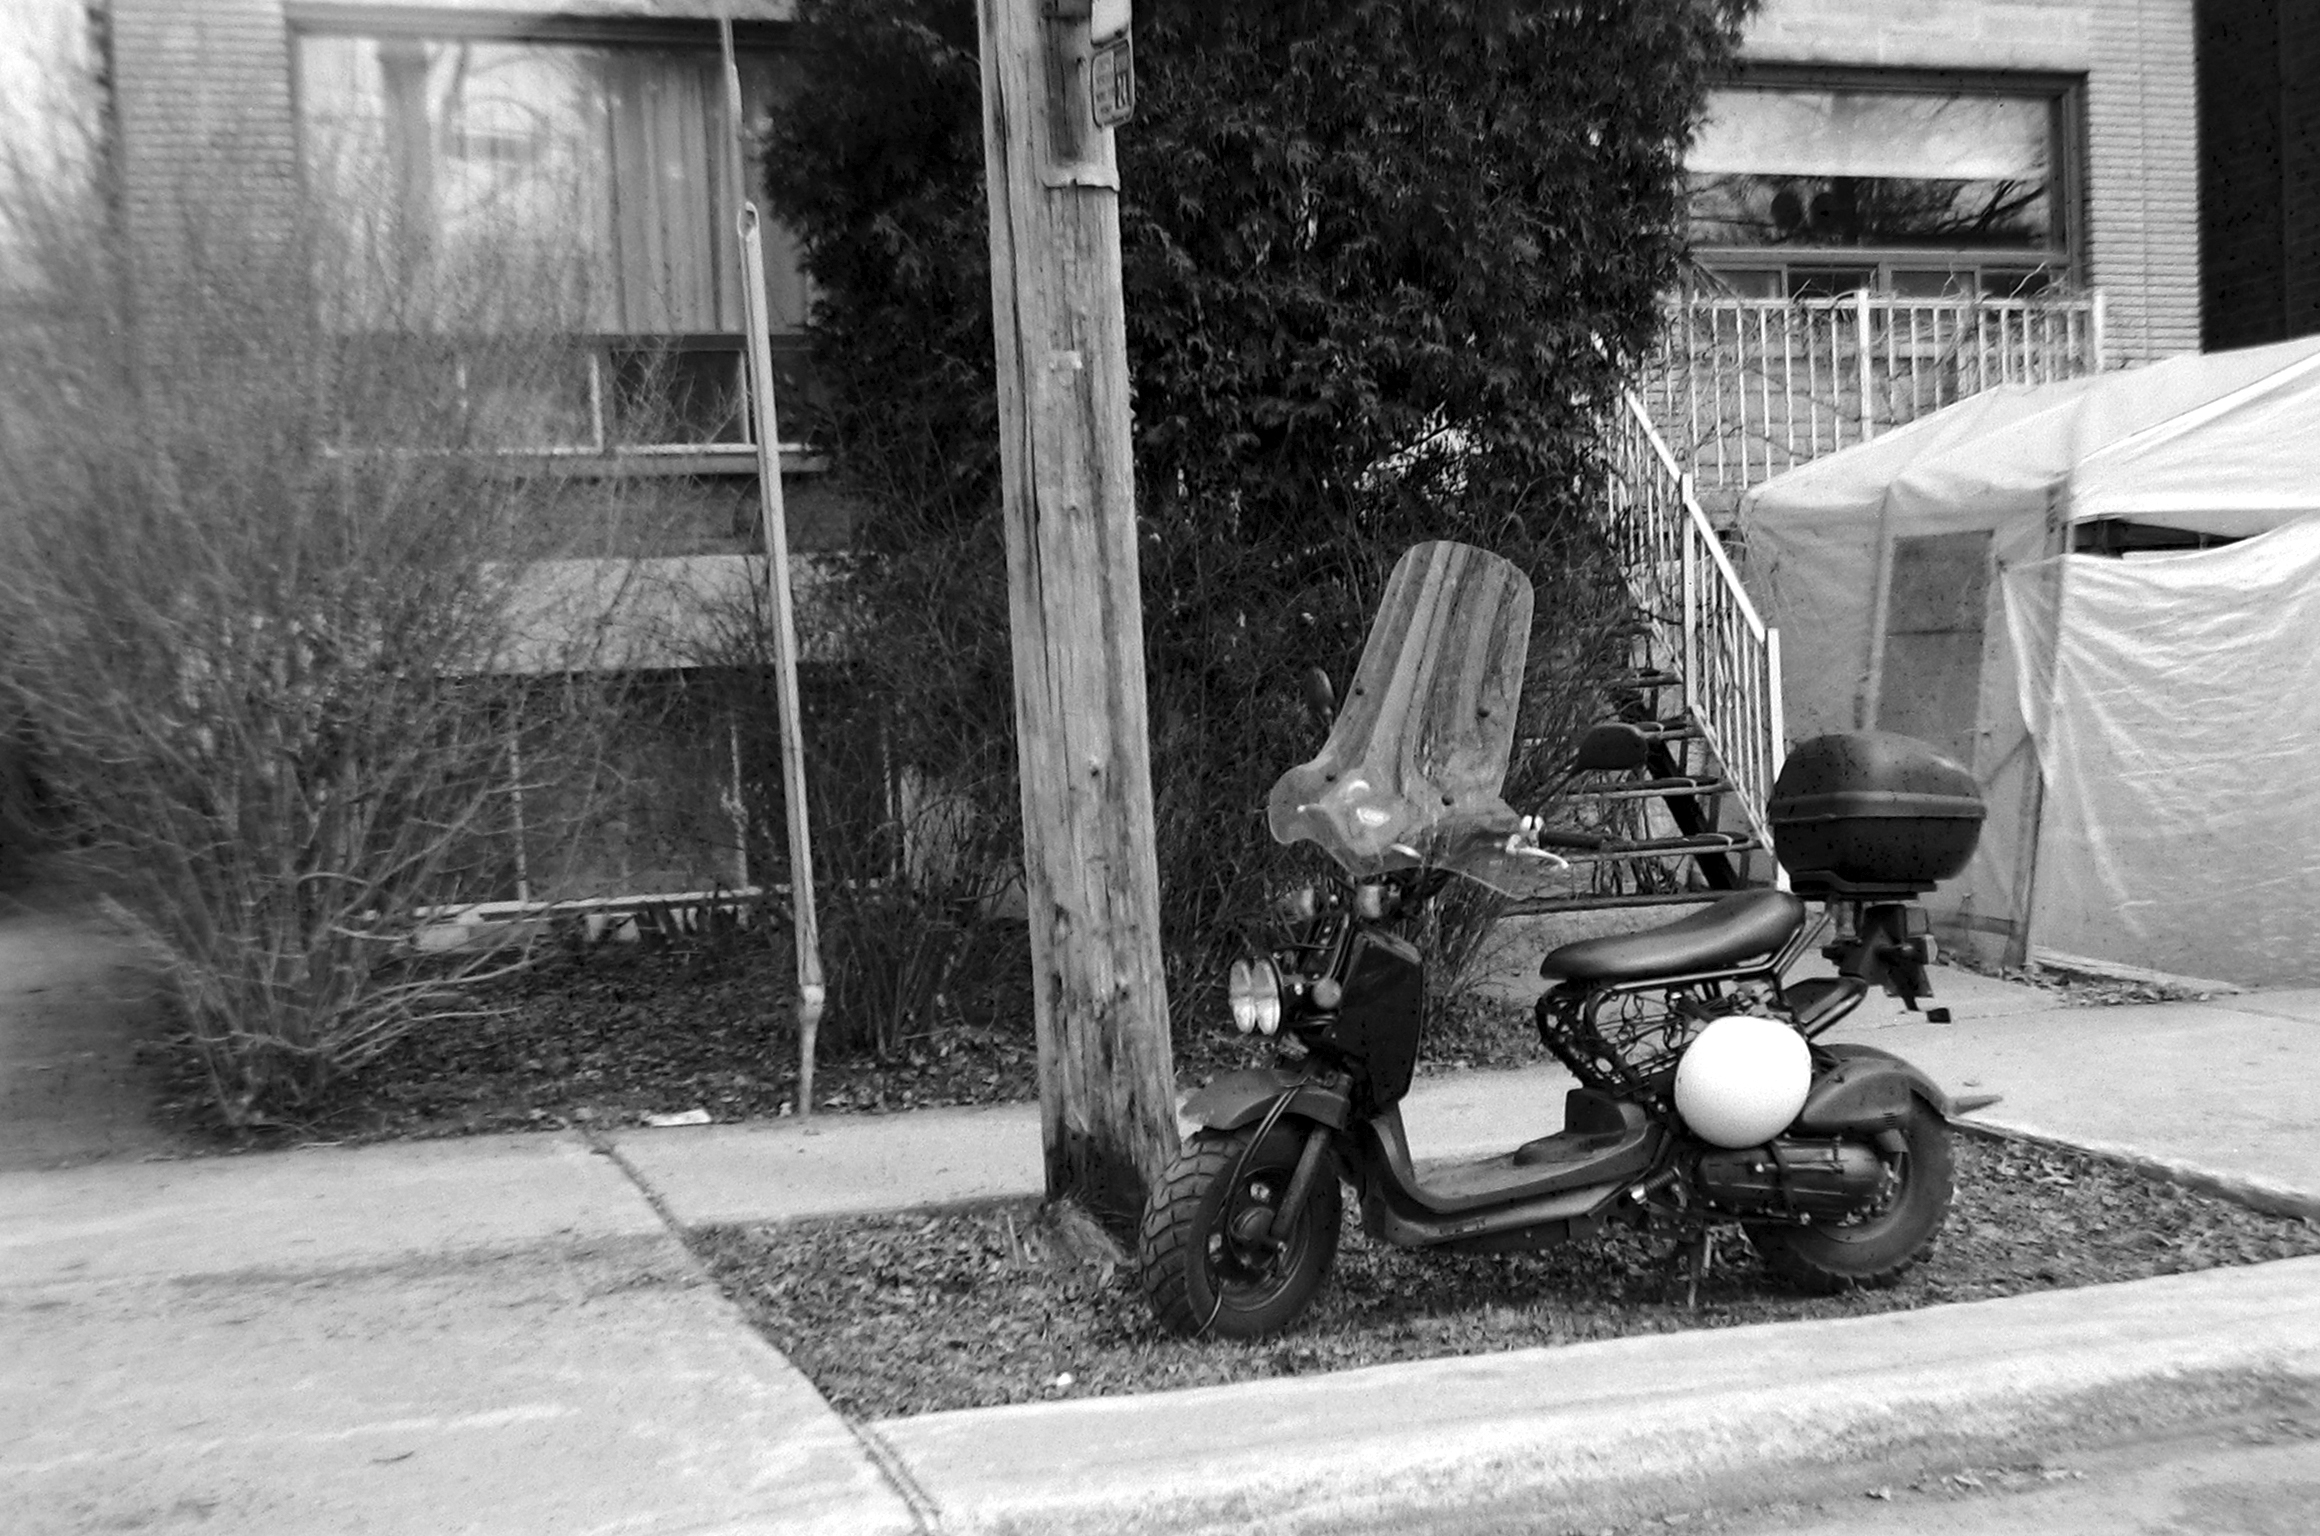 a black and white po of an older scooter parked on the curb